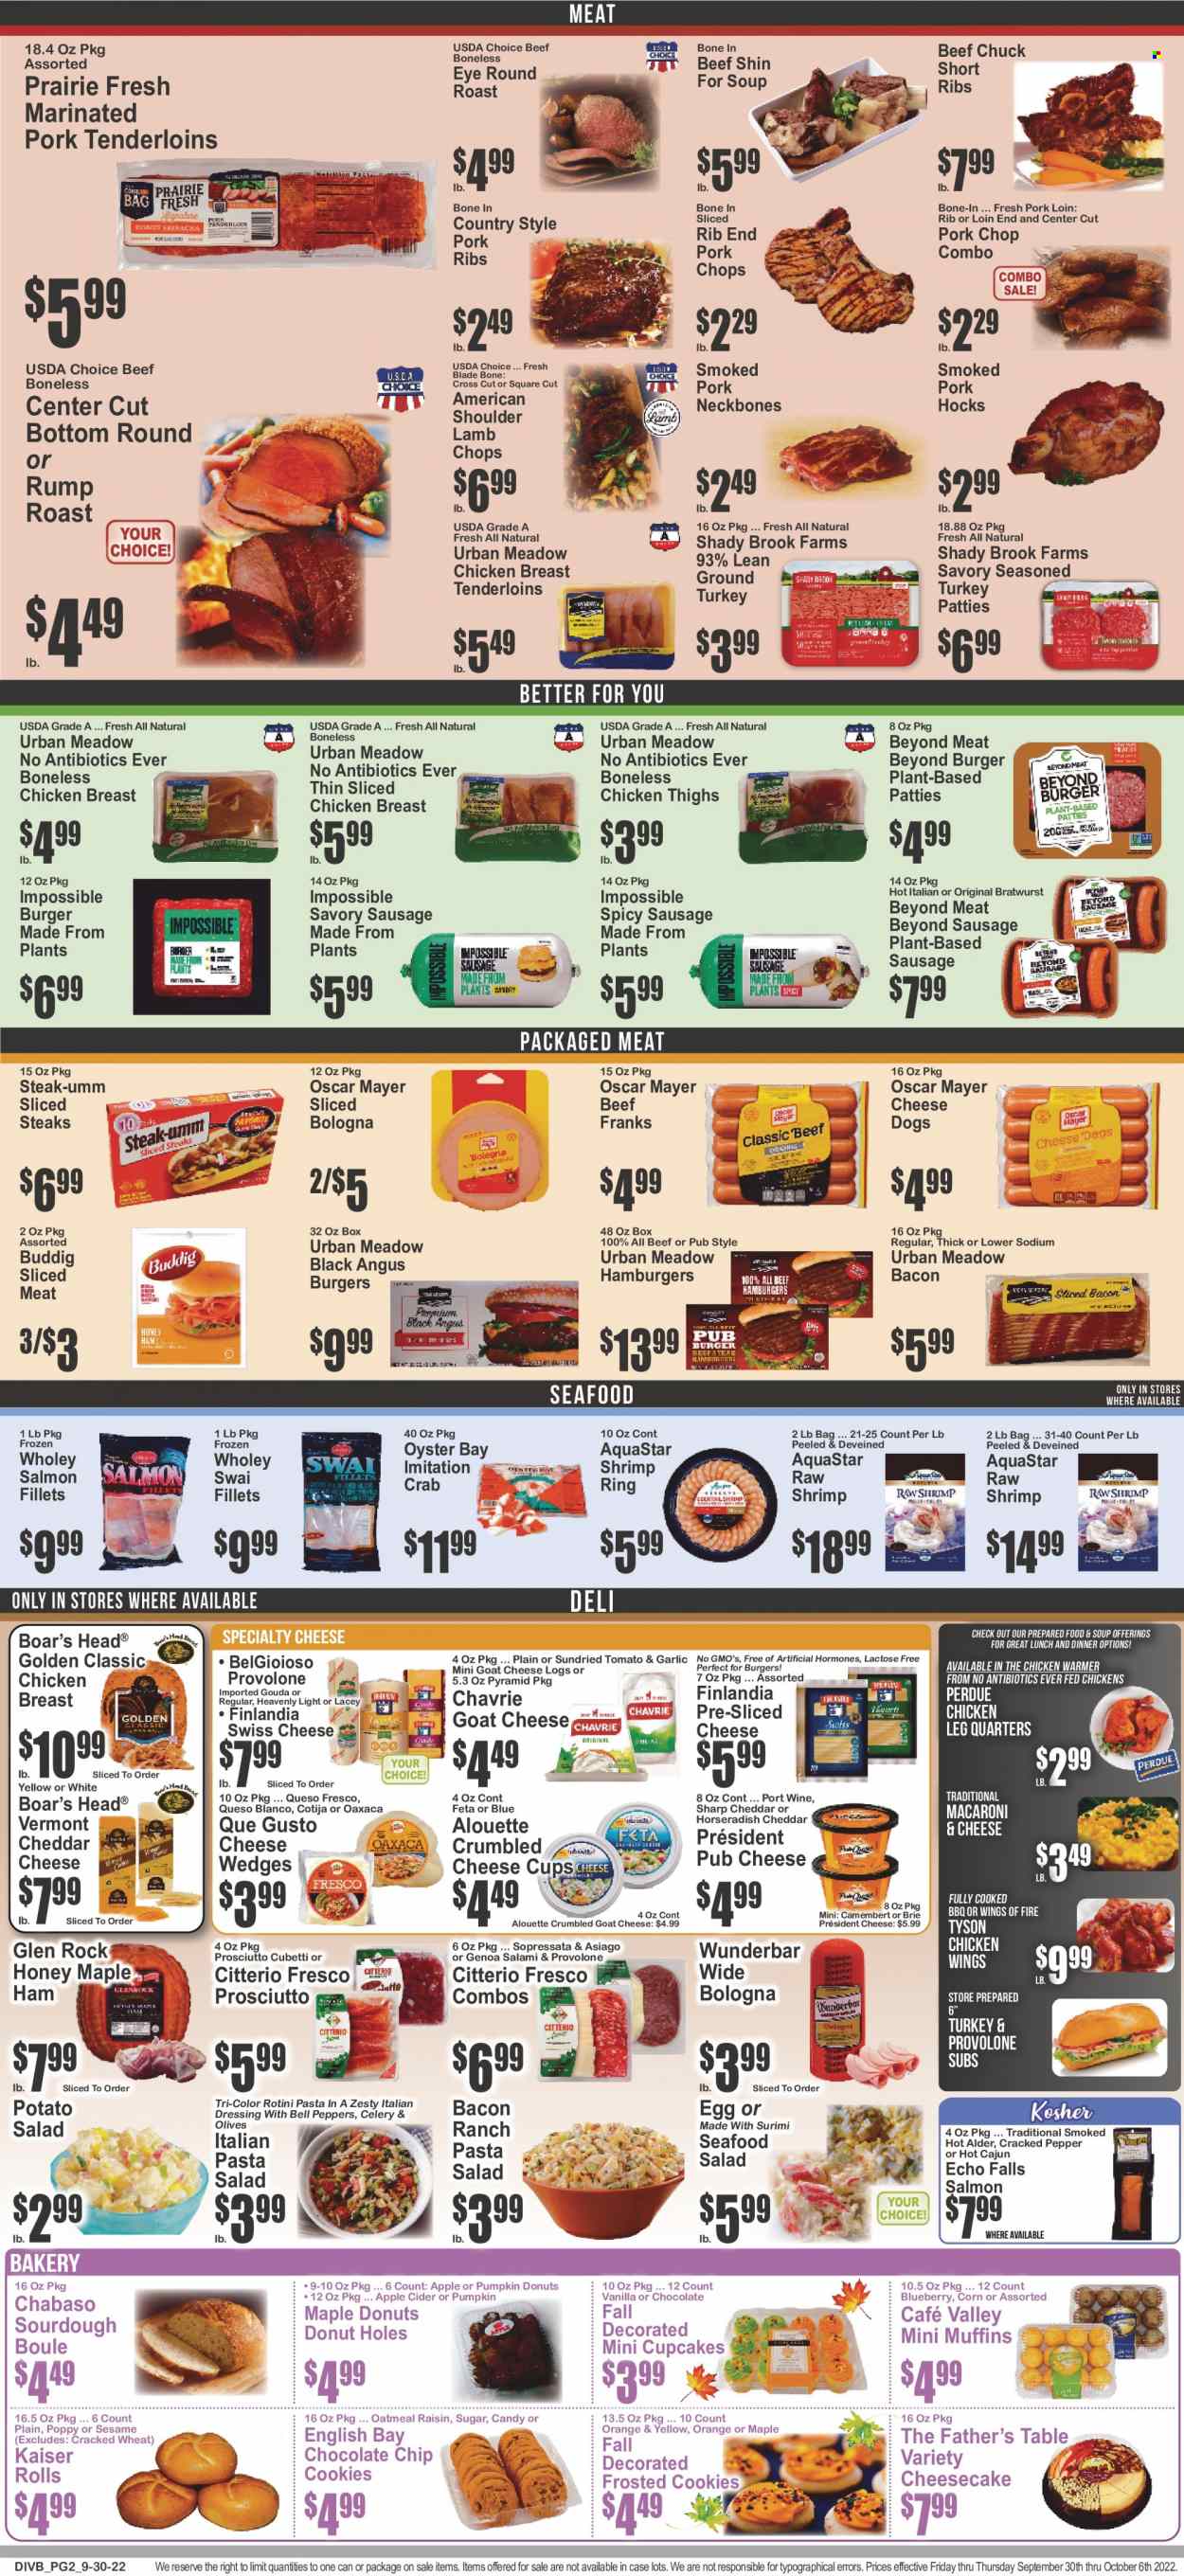 thumbnail - Food Dynasty Flyer - 09/30/2022 - 10/06/2022 - Sales products - Father's Table, cupcake, donut holes, cheesecake, muffin, celery, corn, horseradish, pumpkin, salad, oranges, salmon, salmon fillet, oysters, seafood, crab, shrimps, swai fillet, macaroni & cheese, soup, hamburger, pasta, Perdue®, bacon, salami, ham, prosciutto, bologna sausage, Oscar Mayer, bratwurst, sausage, potato salad, seafood salad, pasta salad, smoked pork hock, asiago, camembert, goat cheese, gouda, sliced cheese, swiss cheese, queso fresco, cheese cup, pub cheese, brie, Président, feta, Provolone, eggs, italian dressing, chicken wings, cookies, sugar, oatmeal, olives, dressing, honey, apple cider, port wine, cider, ground turkey, chicken breasts, chicken legs, chicken thighs, beef meat, steak, round roast, pork chops, pork loin, pork meat, pork ribs, pork tenderloin, marinated pork, lamb chops, lamb meat, cup. Page 2.